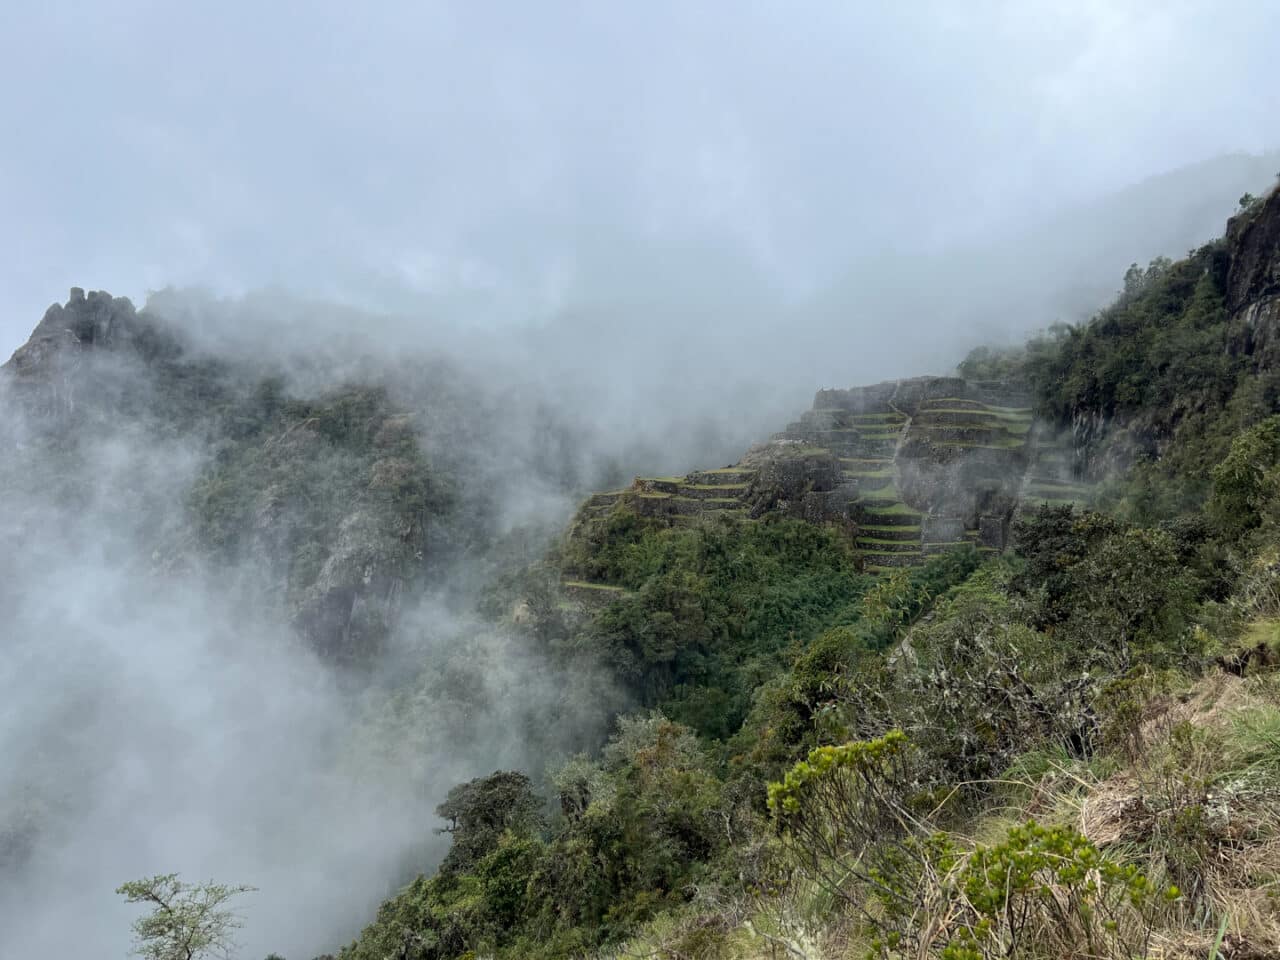 Views from the Inca Trail